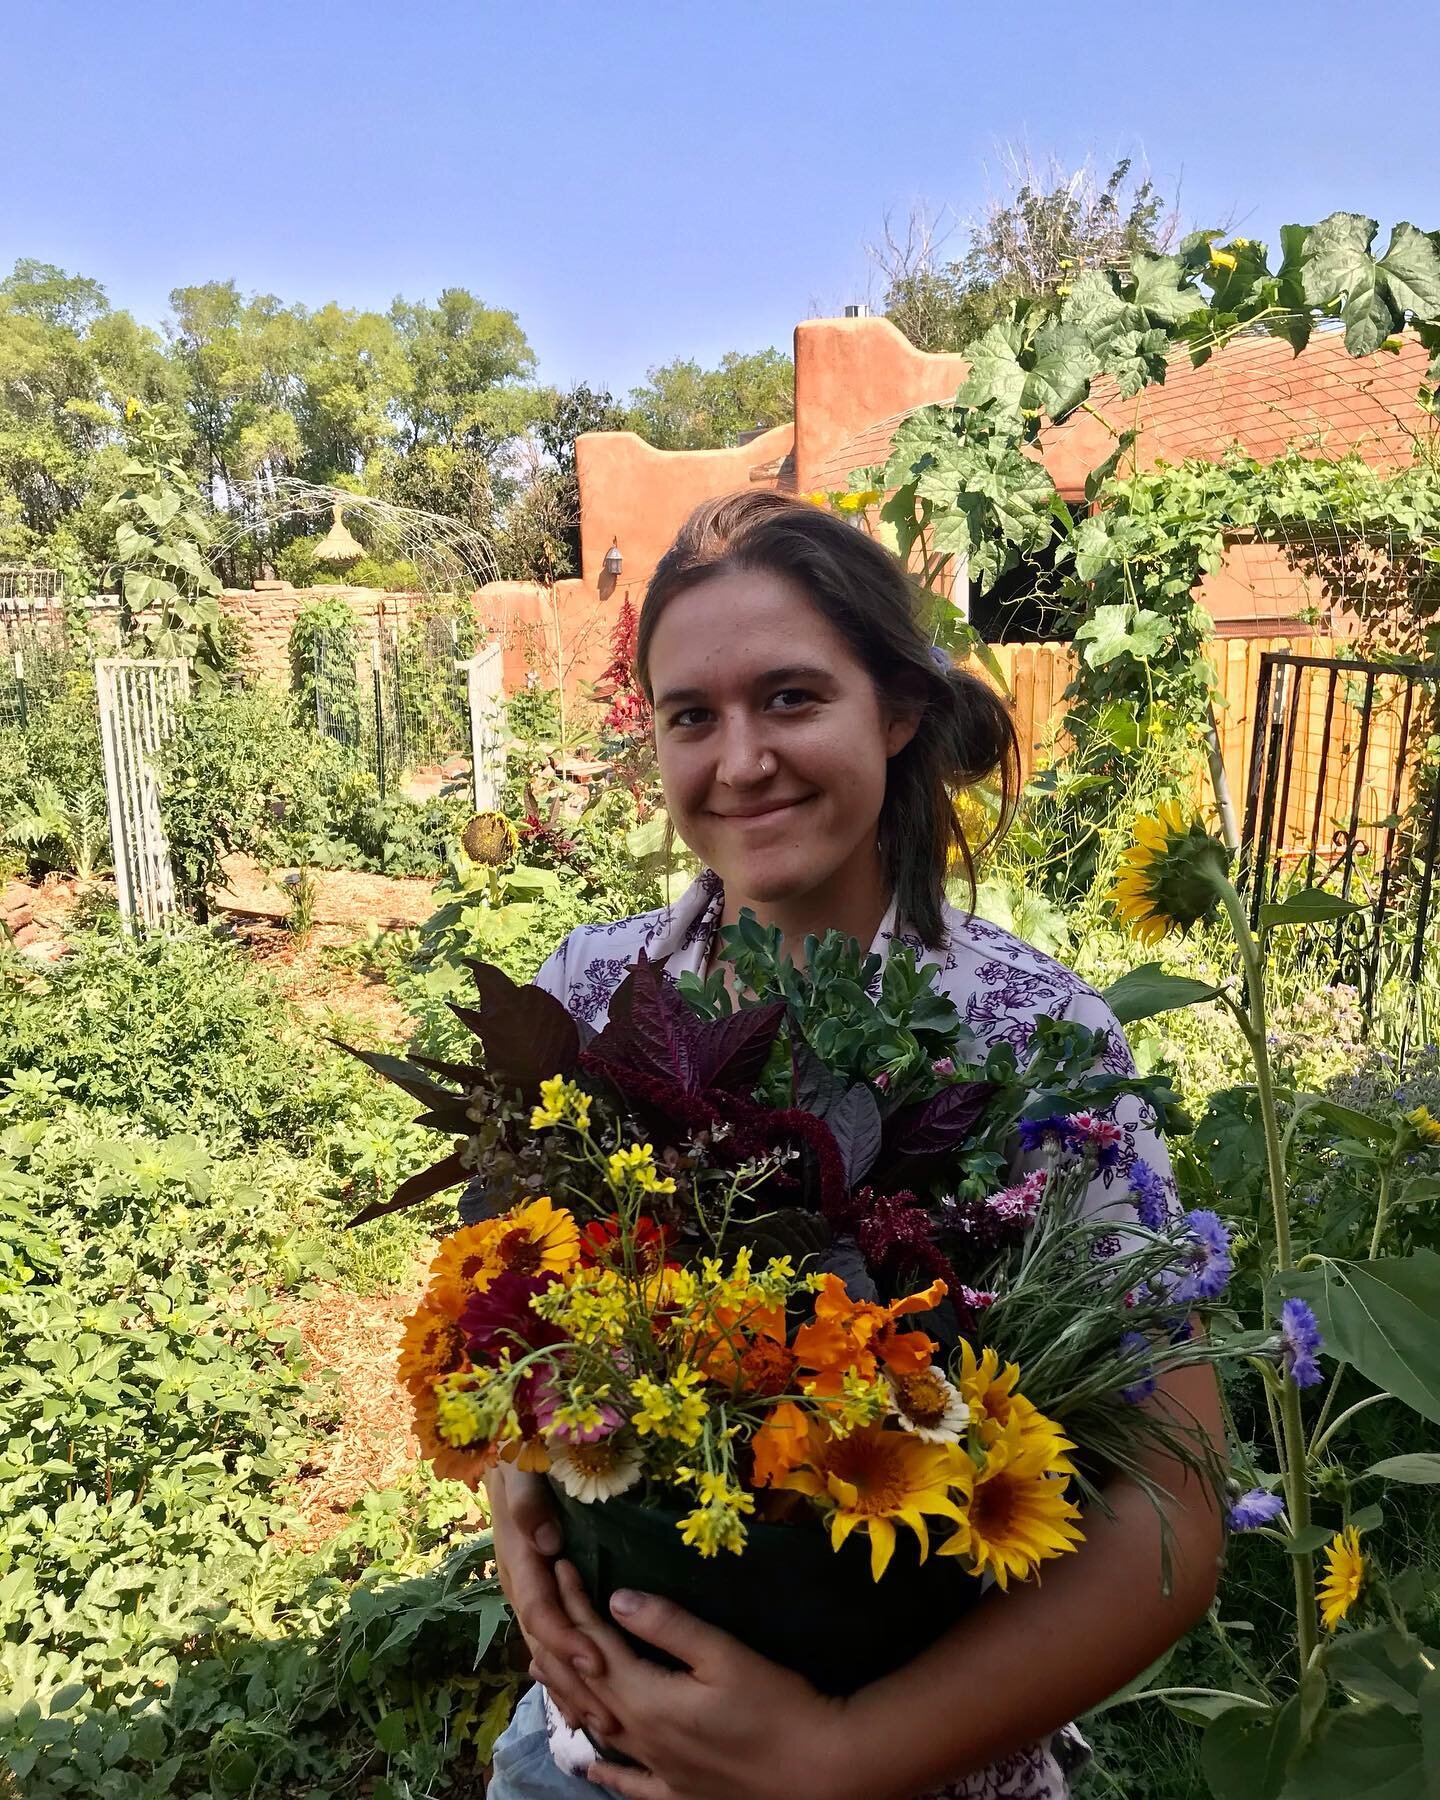 Maybe I&rsquo;ll just become a flower farmer. 

Had a lovely time picking flowers with @kucharclaudia for @jennifer.kuchar &lsquo;s opera&hellip; my sisters are pretty cool. 

@kucharafarms #farmer #flowerfarmer #womanfarmer #garden #flowergarden #fl